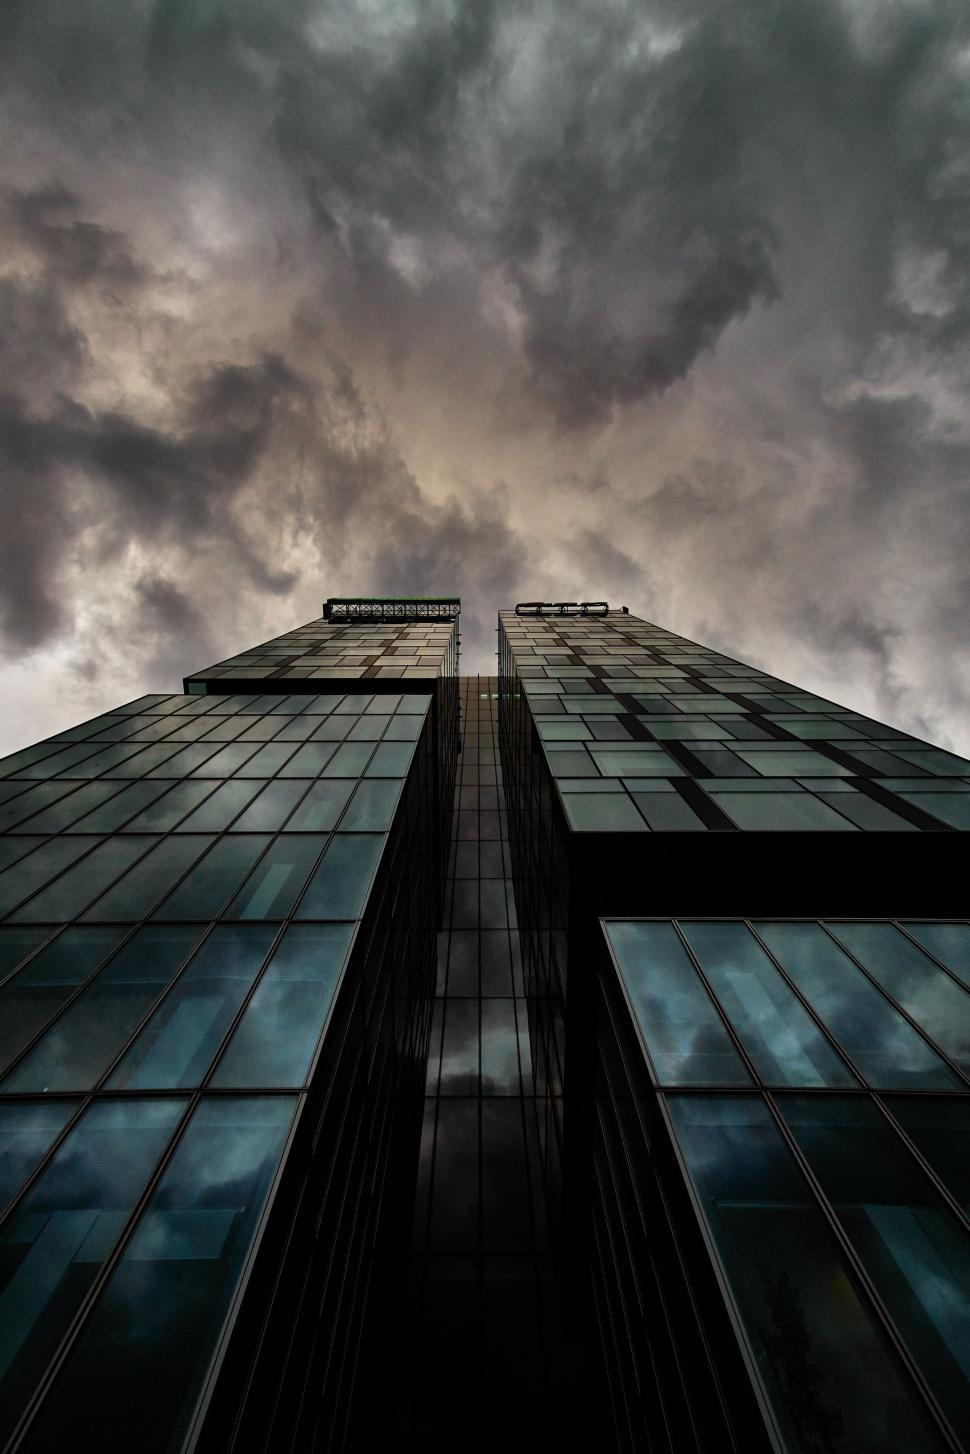 Free Image of Tall Building Against Cloudy Sky 